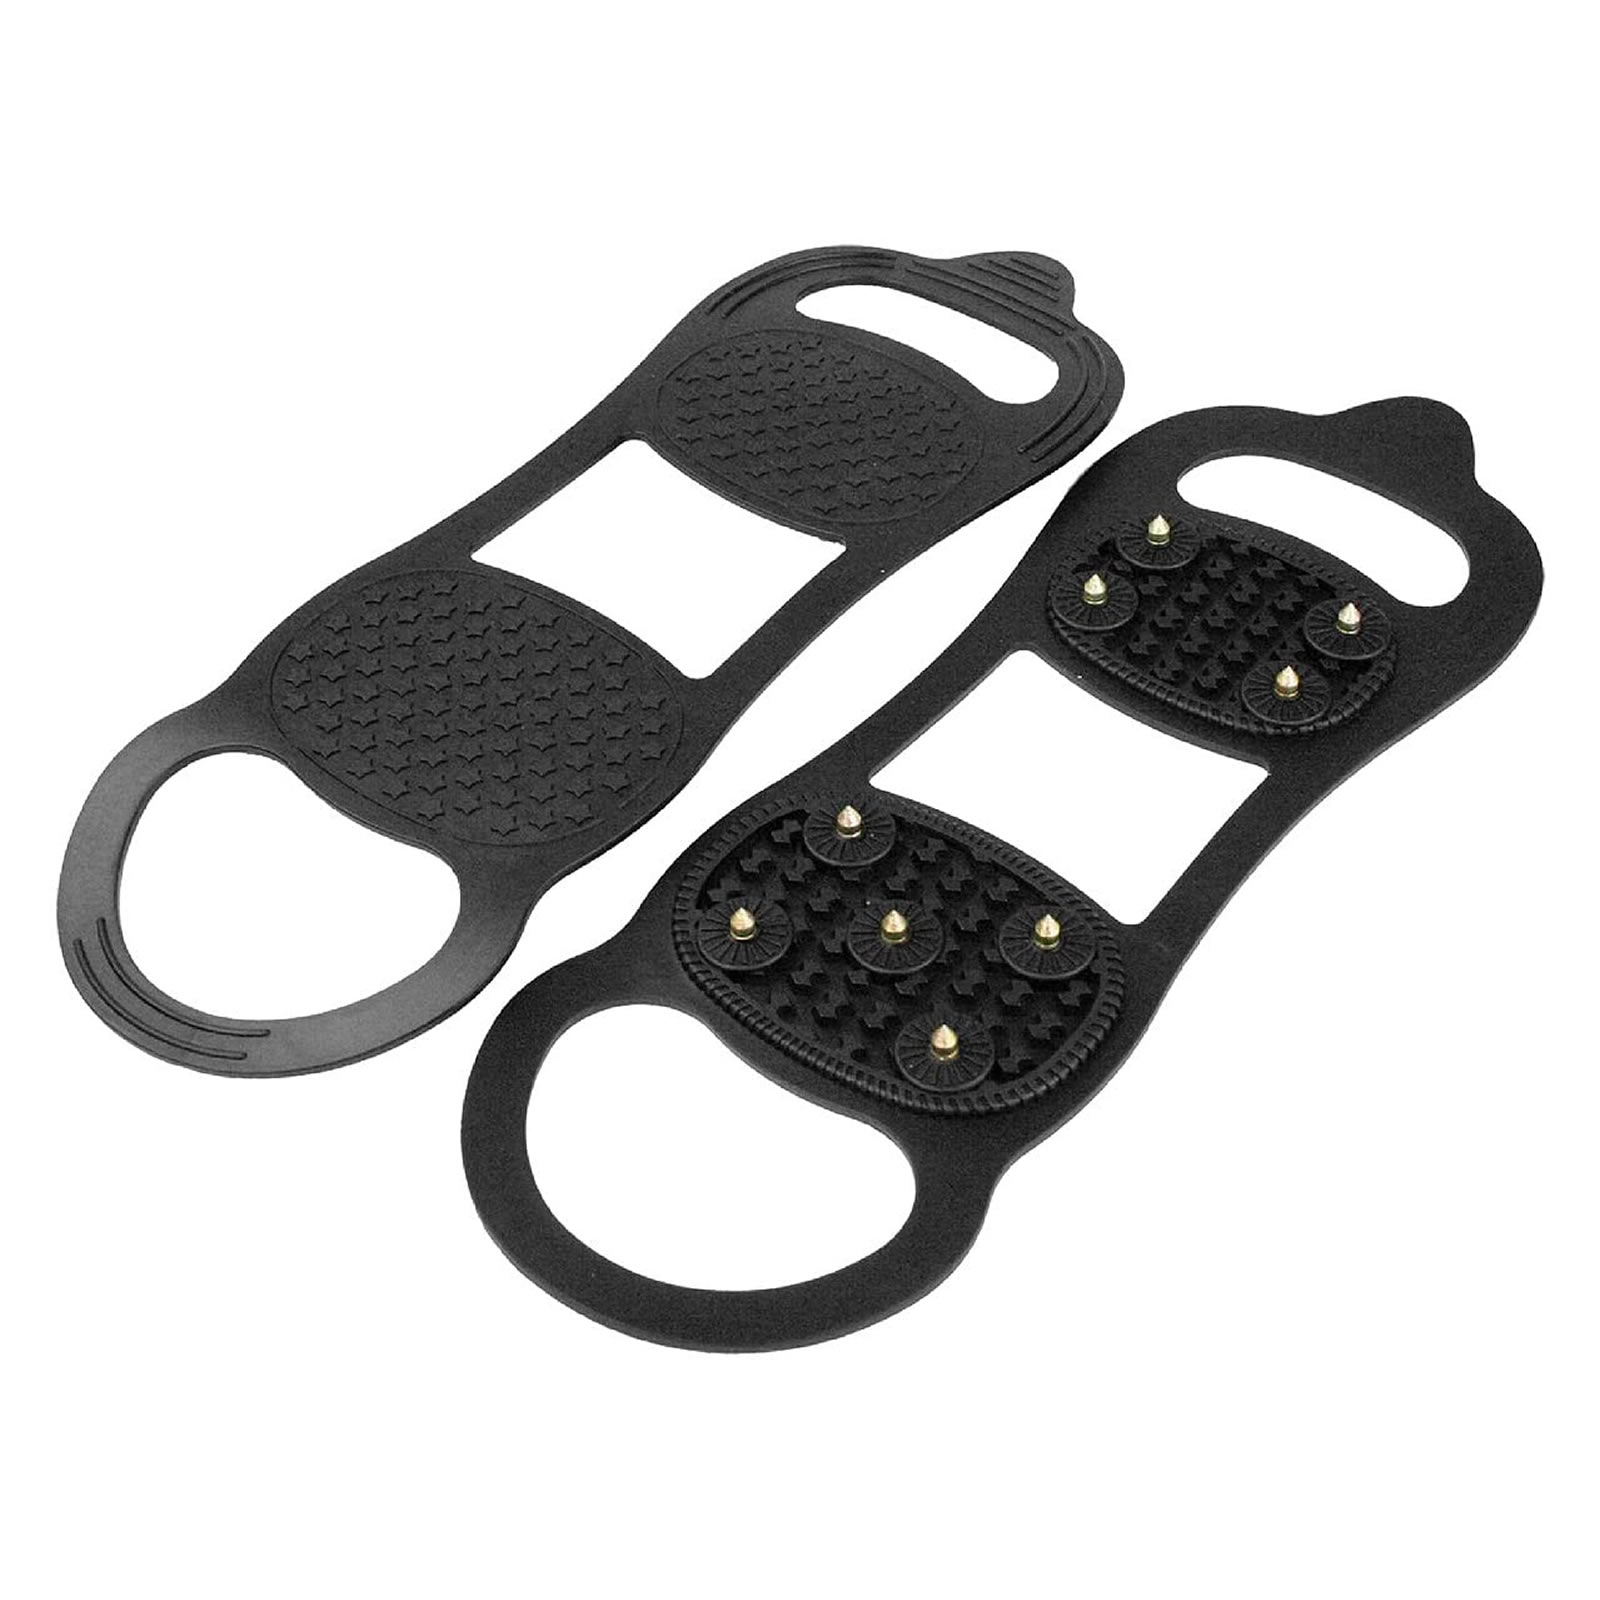 Highlander Snow & Ice Grippers Black Traction Thermoplastic Rubber UK 7-12